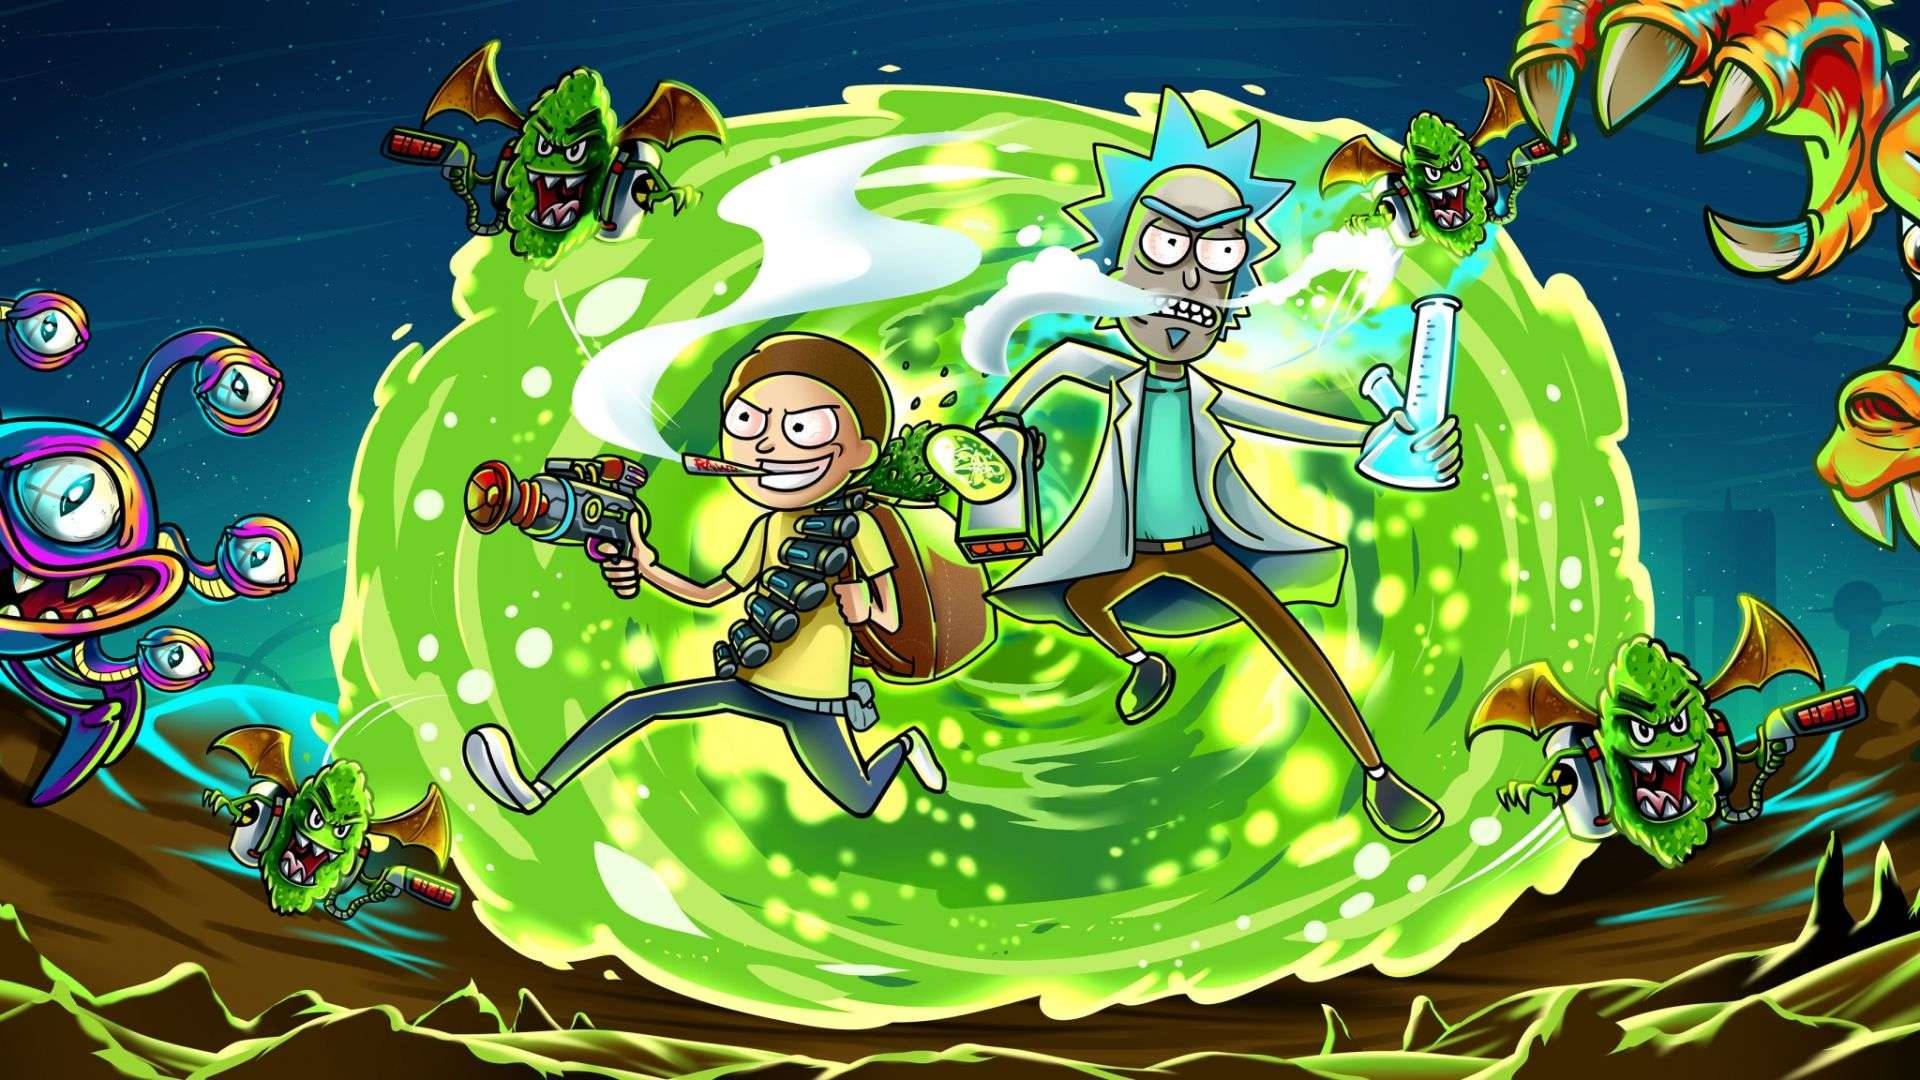 Free Rick And Morty Wallpaper Downloads 400 Rick And Morty Wallpapers  for FREE  Wallpaperscom